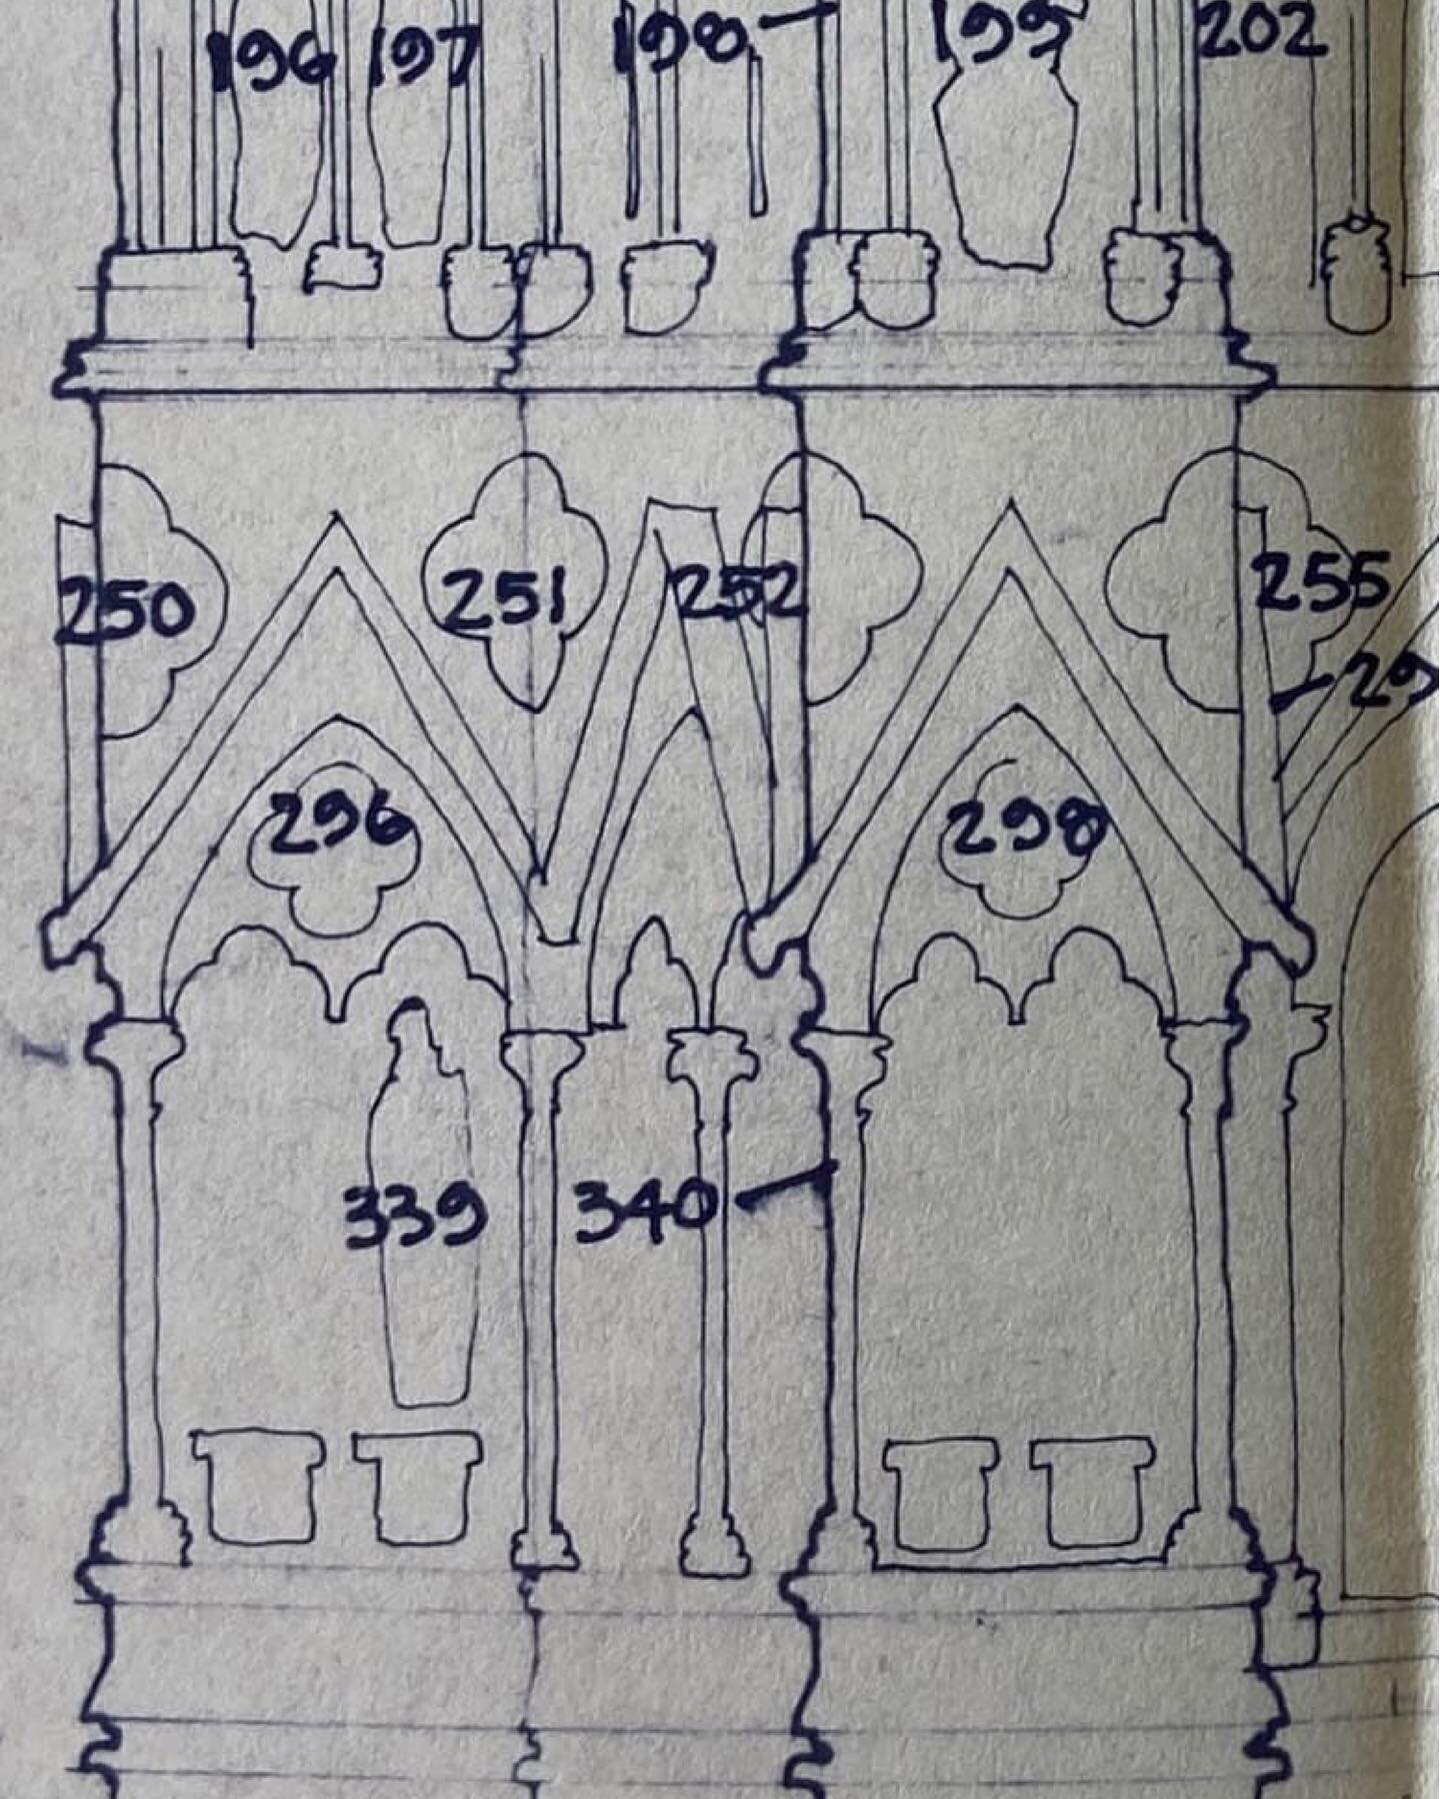 &ldquo;Statues now surviving are shown numbered in accordance with the system used in &quot;The West Front&quot; by L.S. Colchester, 6th Edition 1978, published by the Friends of Wells Cathedral.&rdquo;

#Niche338, is not numbered in this schematic a